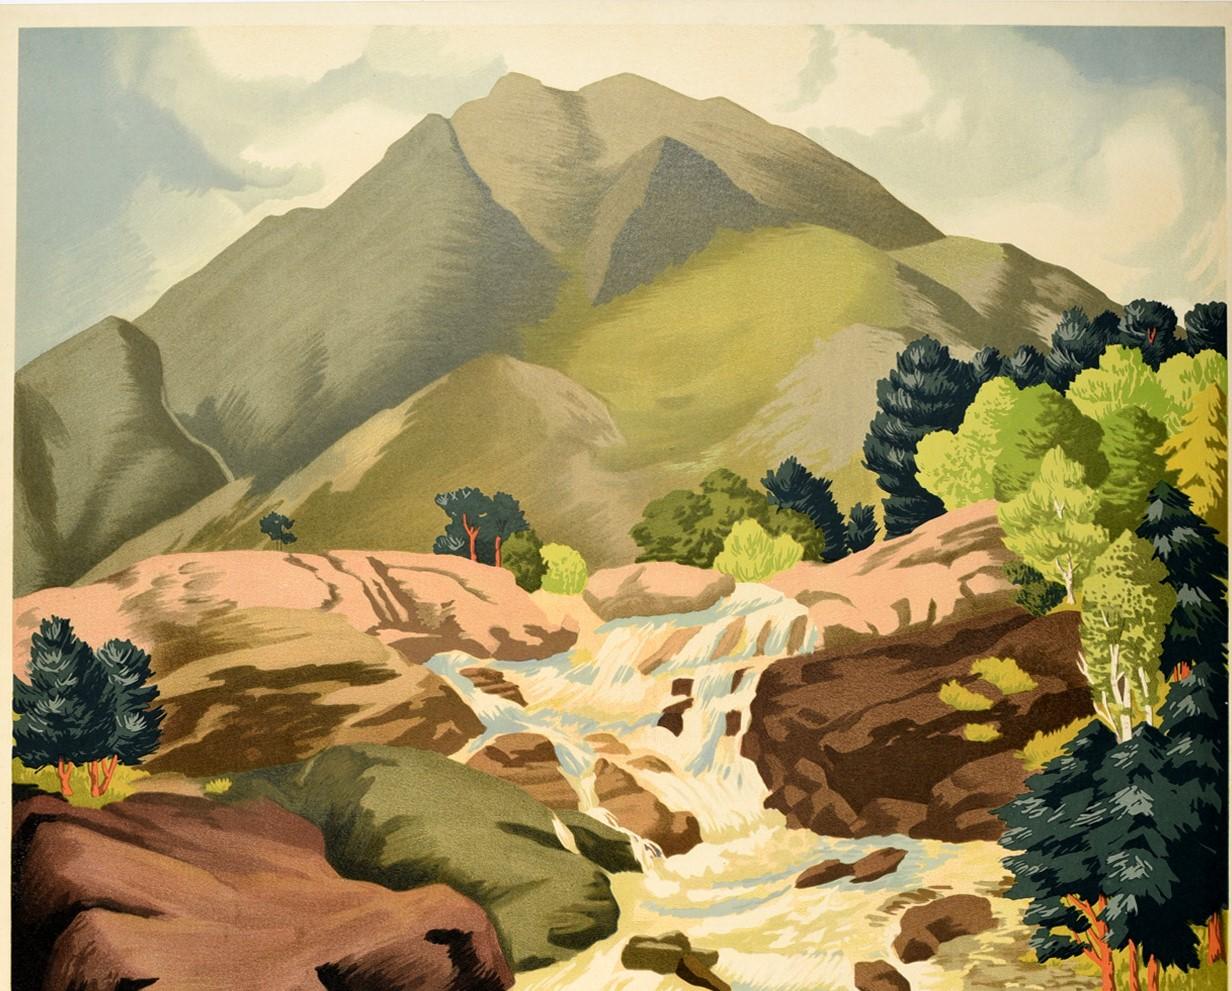 Original vintage GWR train travel poster advertising Wales issued by the Great Western Railway featuring a scenic image of a rocky stream with the water flowing down in front of a hill between trees in the picturesque Welsh countryside and the title